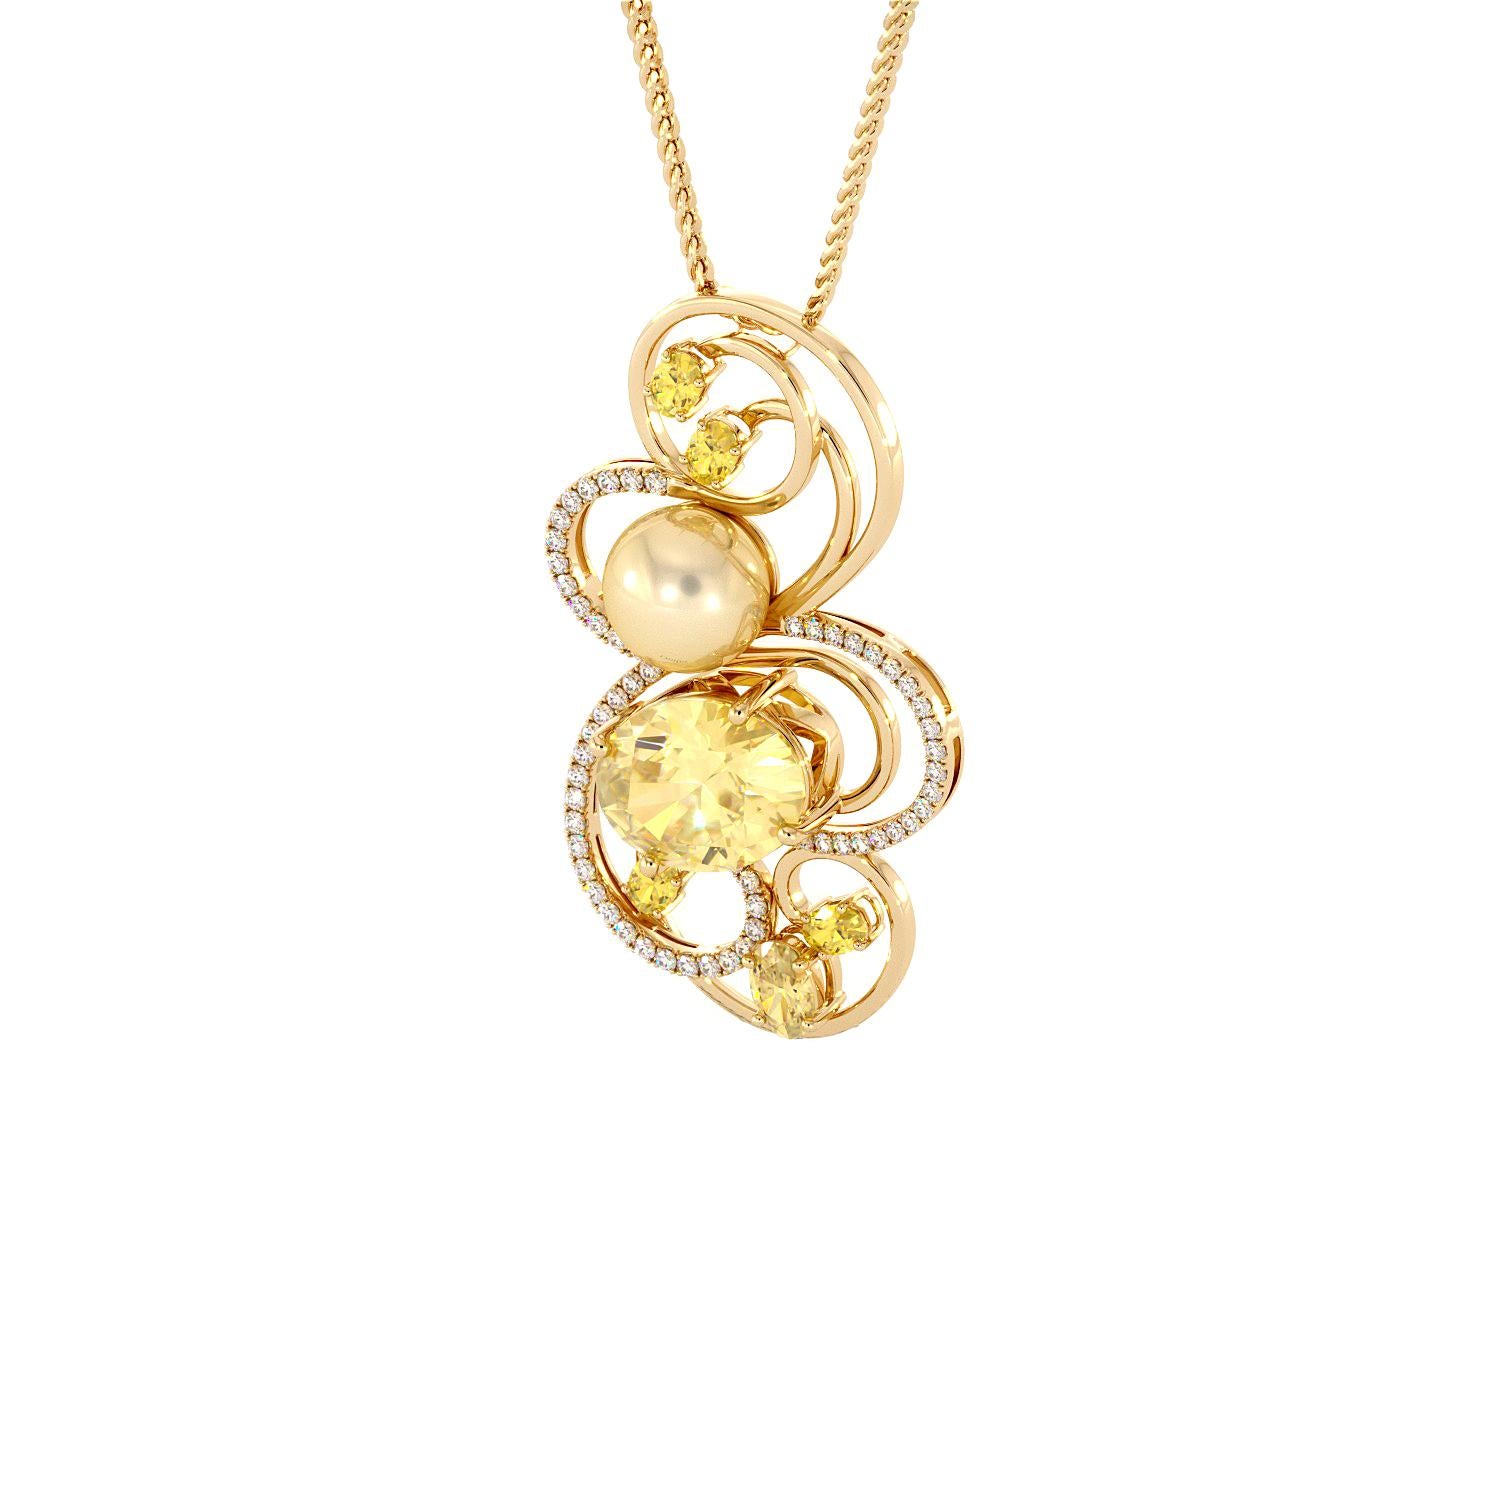 This sophisticated pendant is part of Sunrise Collection. Designed by Emilia Lekarrier, Handcrafted and made in Canada, using high quality diamonds and gemstones. Certified by CGA & GIA Appraiser.

Metal: 14kt Yellow Gold
Diamond Clarity: